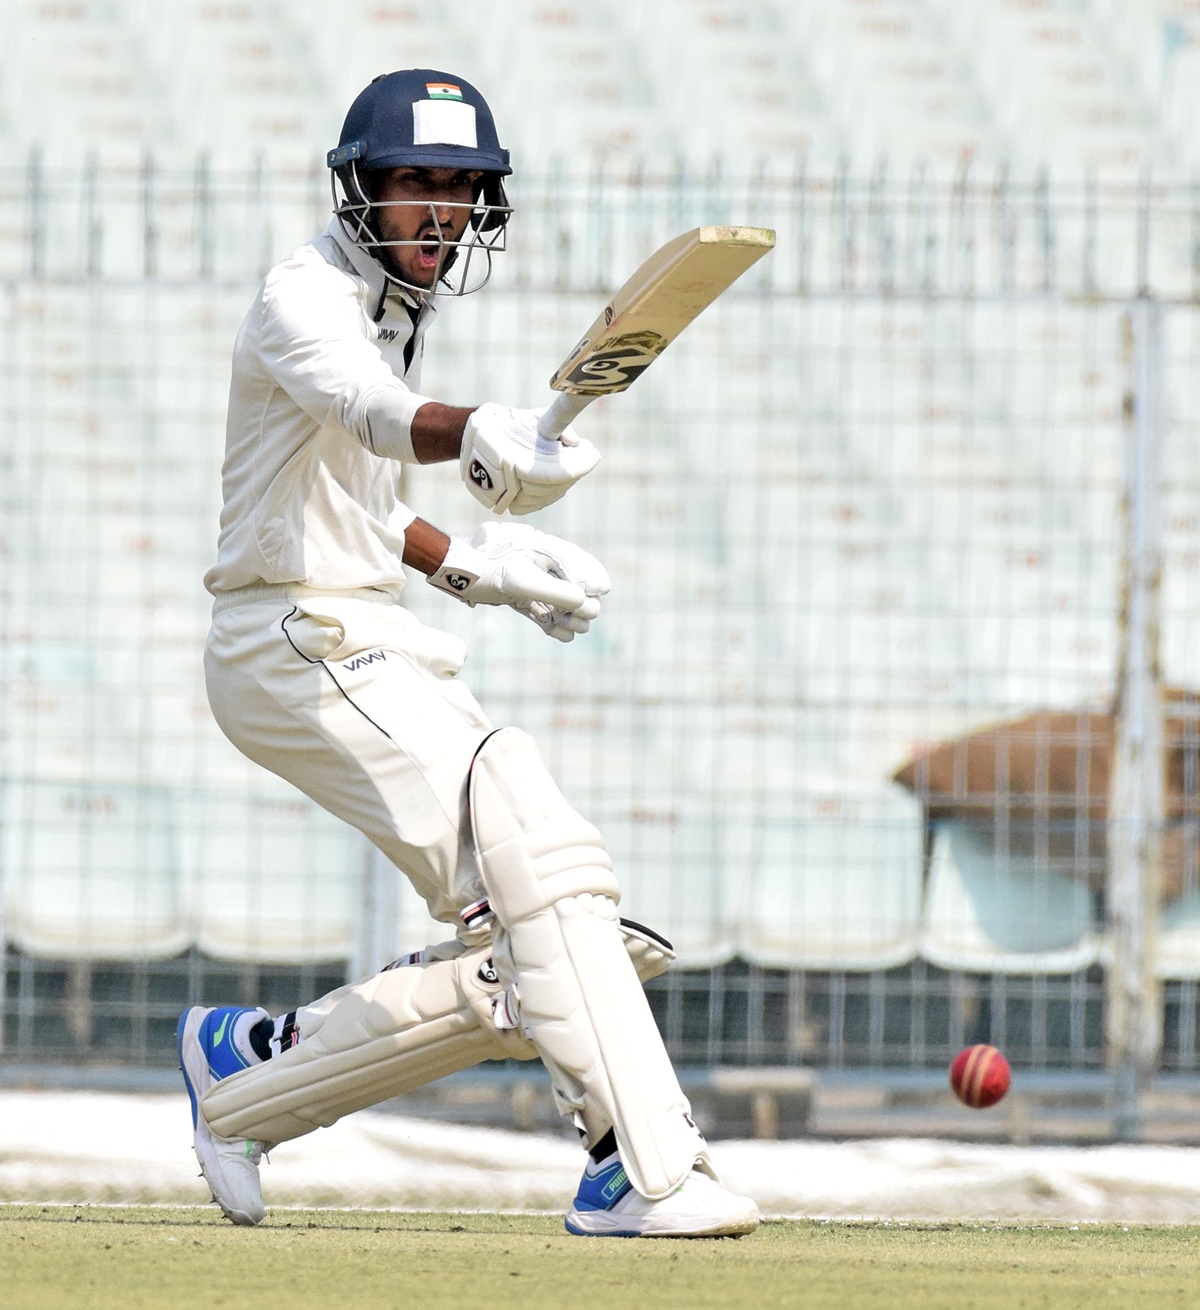 Spin all-rounder Shahbaz Ahmed lifted Bengal from the dumps with a gritty 69 off 112 balls, which included 11 fours.